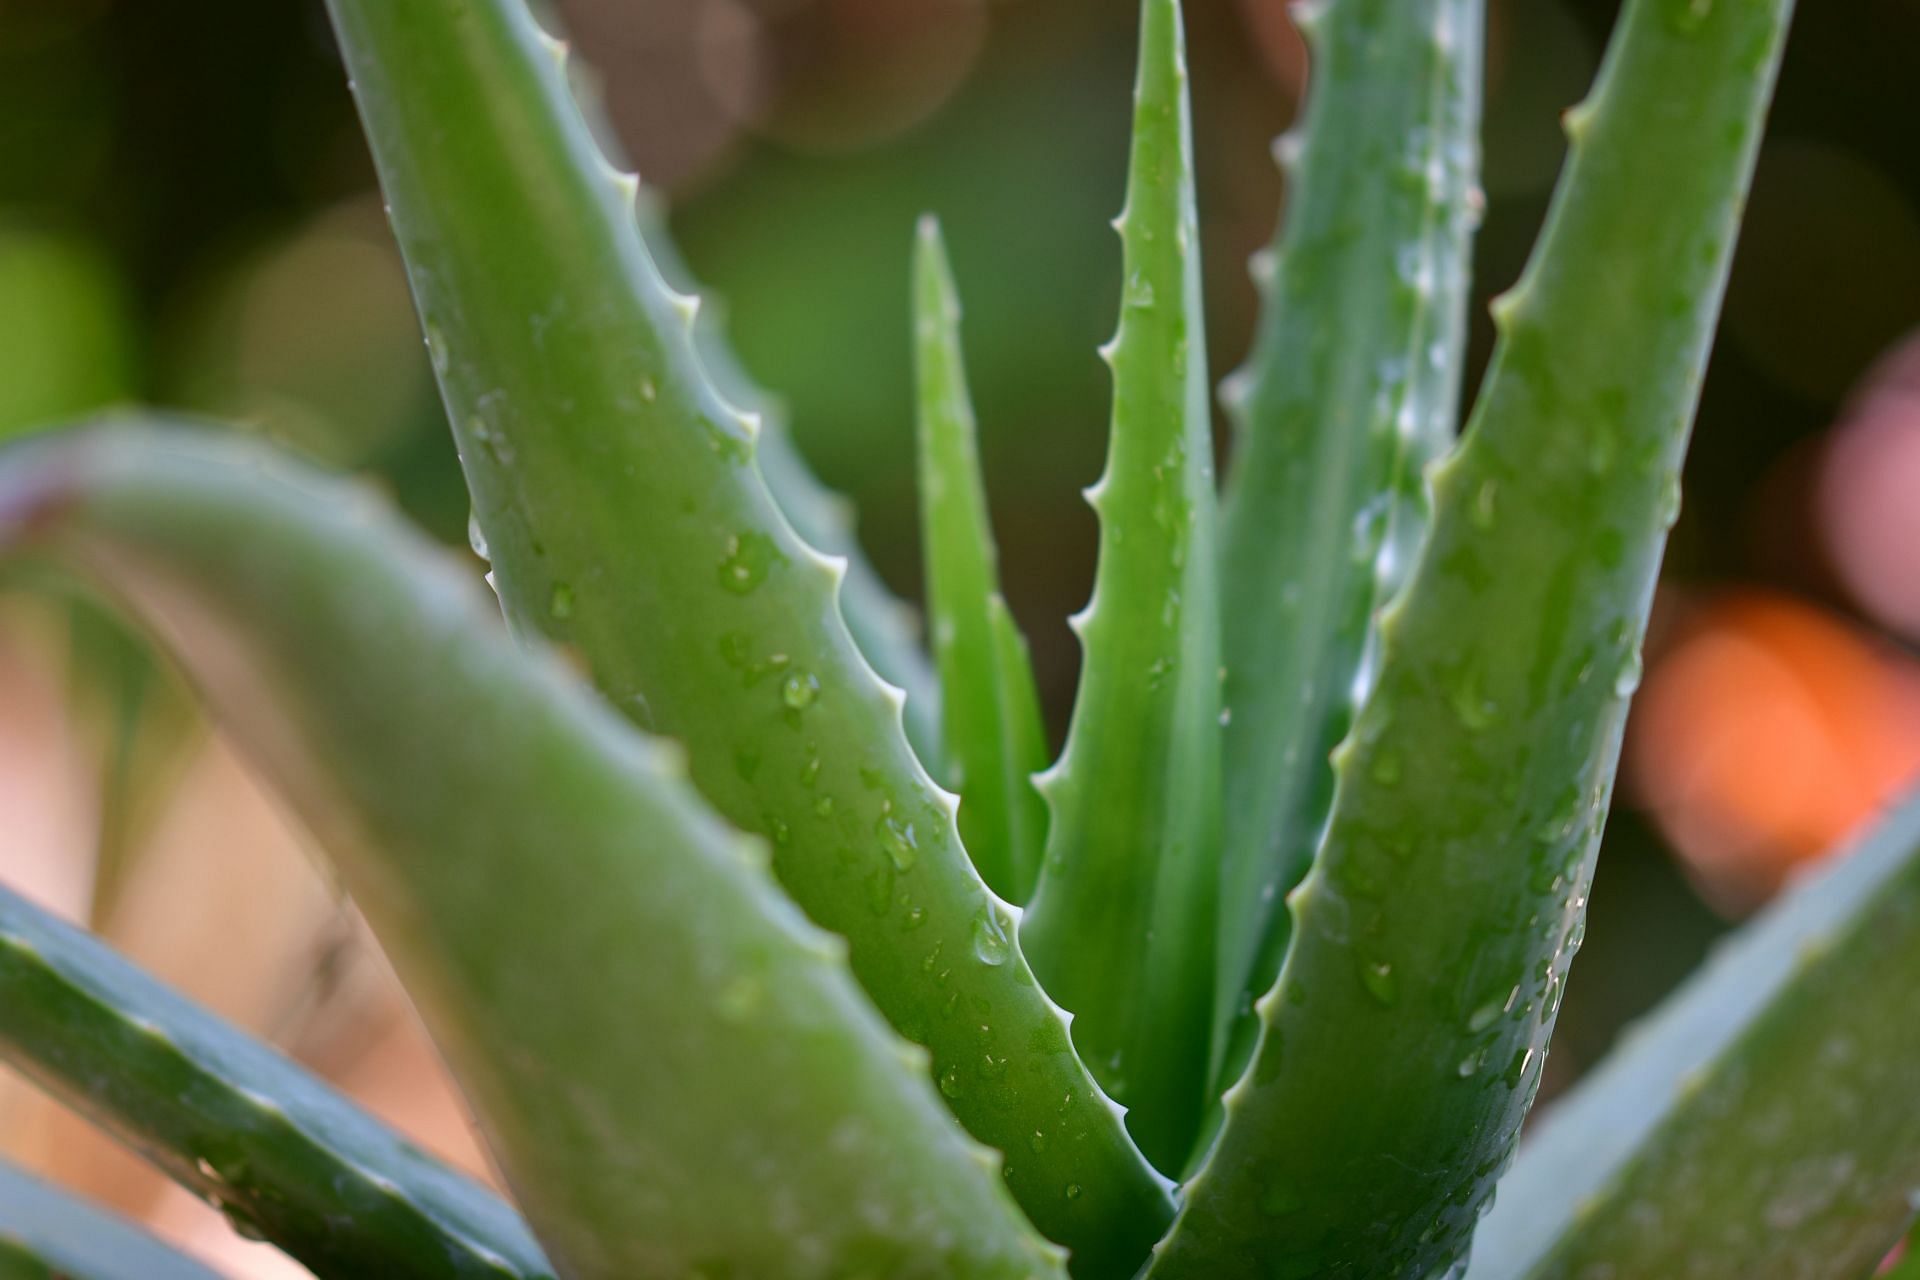 Aloe vera is one of the easy remedies for cold sores. (Image via Unsplash / Pisaunikan)